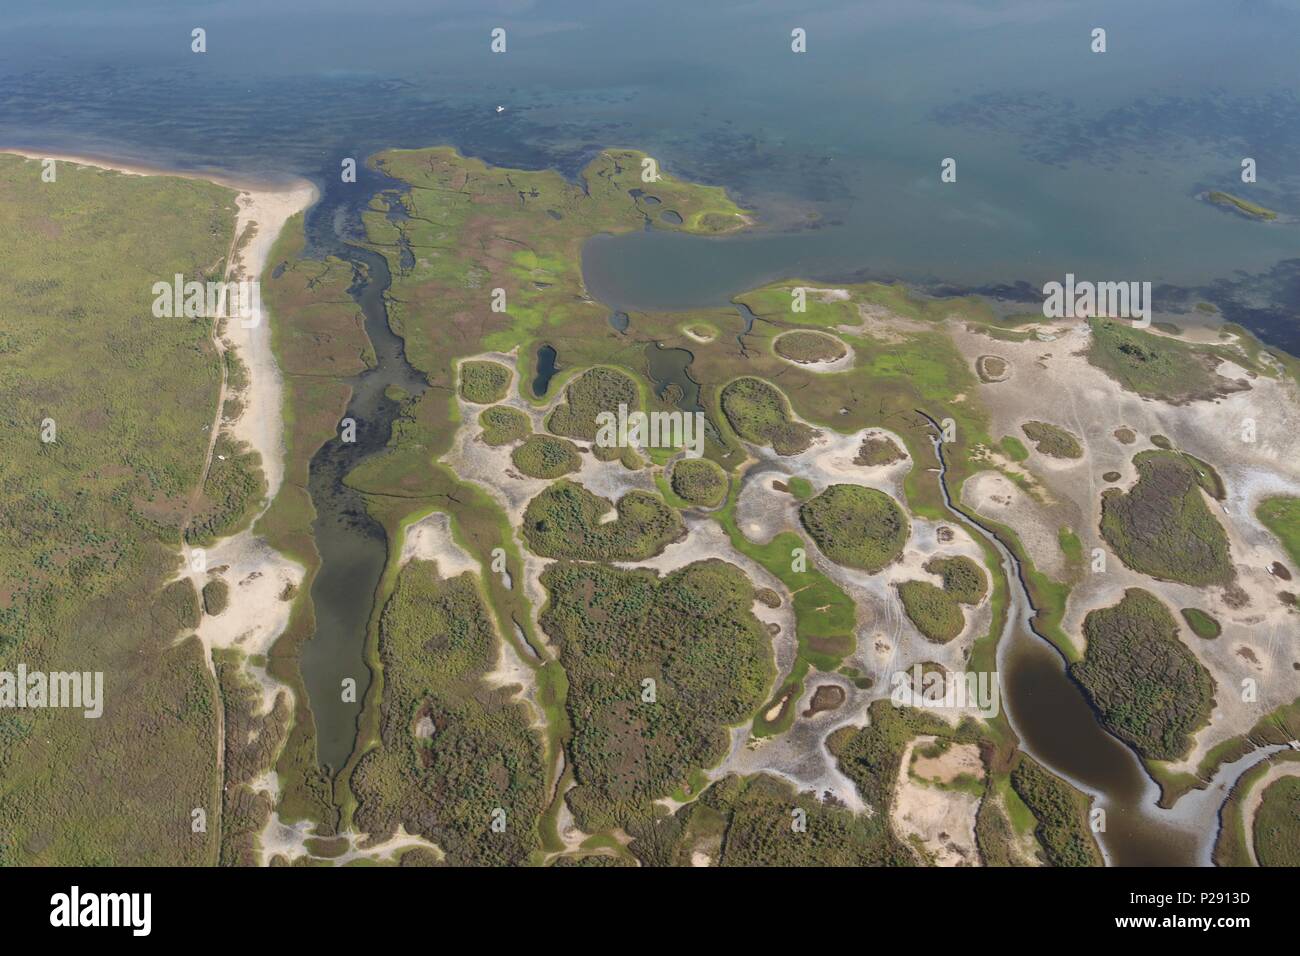 Aerial view of  the Texas Gulf Coast, Galveston Island, USA. Travel landscape panorama of West Galveston Bay, a large nature preserve area. Stock Photo